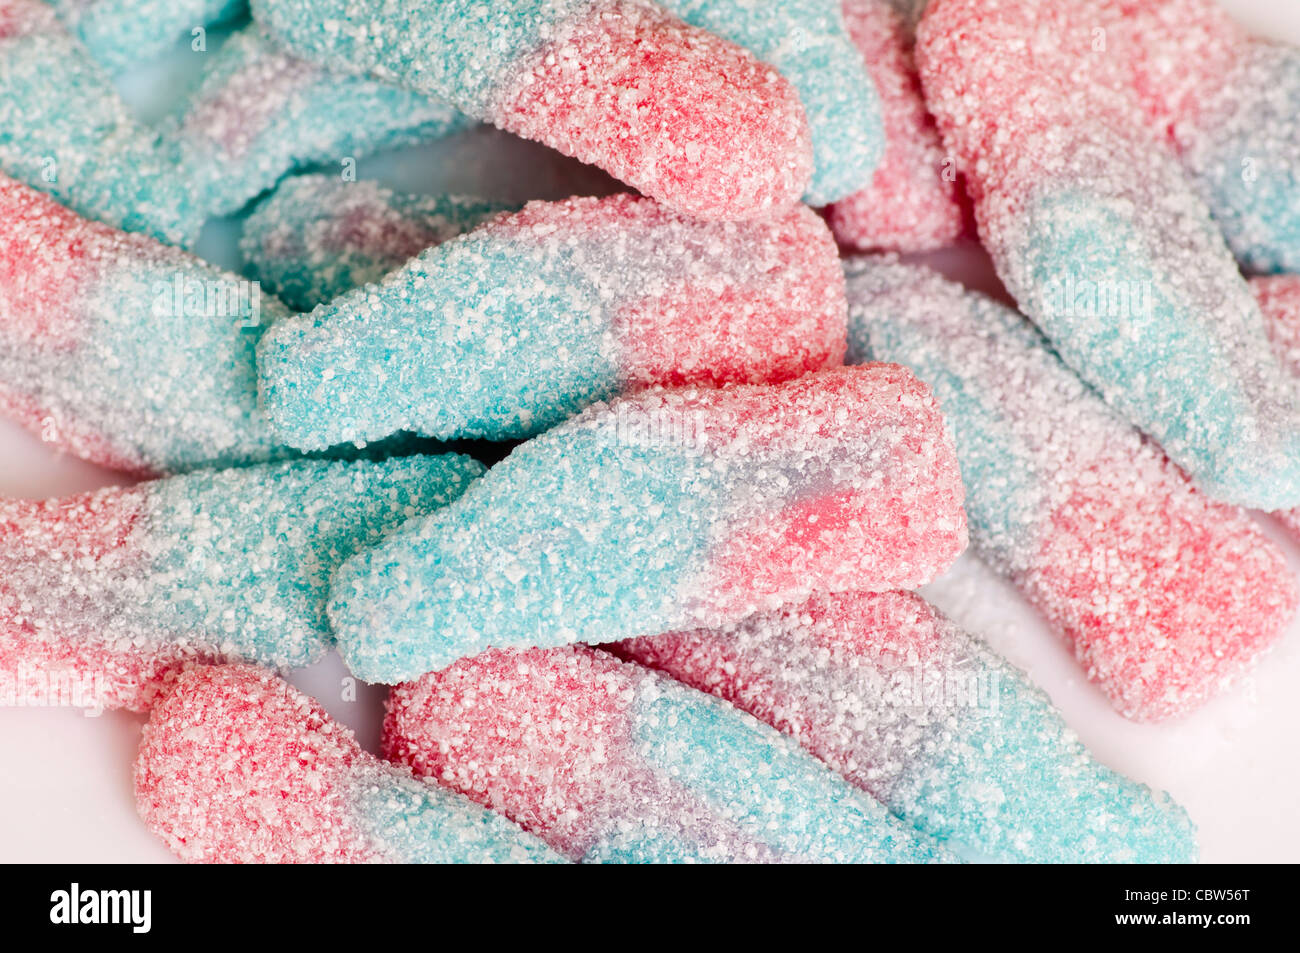 Sour Fizzy Sharp Chewy Chews Sweets Stock Photo